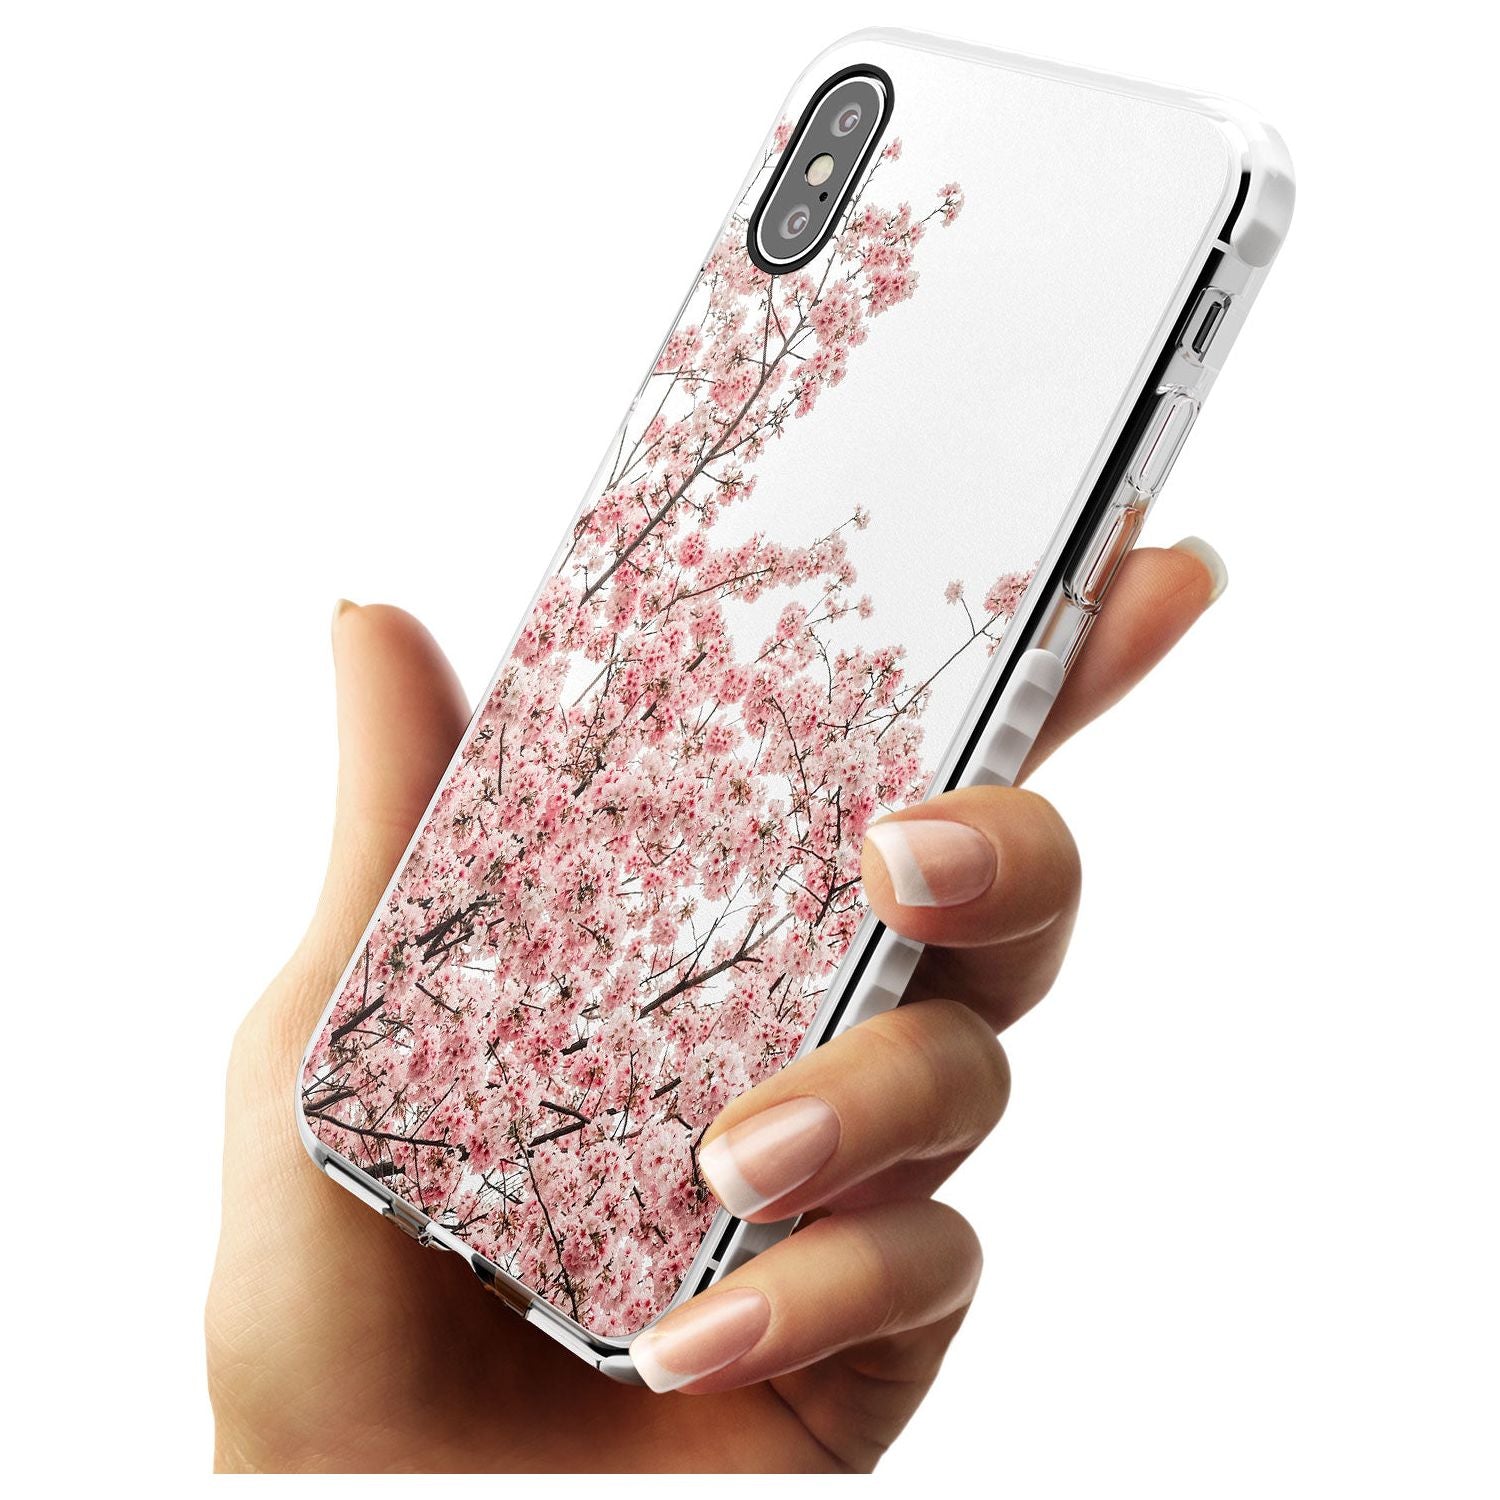 Cherry Blossoms - Real Floral Photographs Impact Phone Case for iPhone X XS Max XR